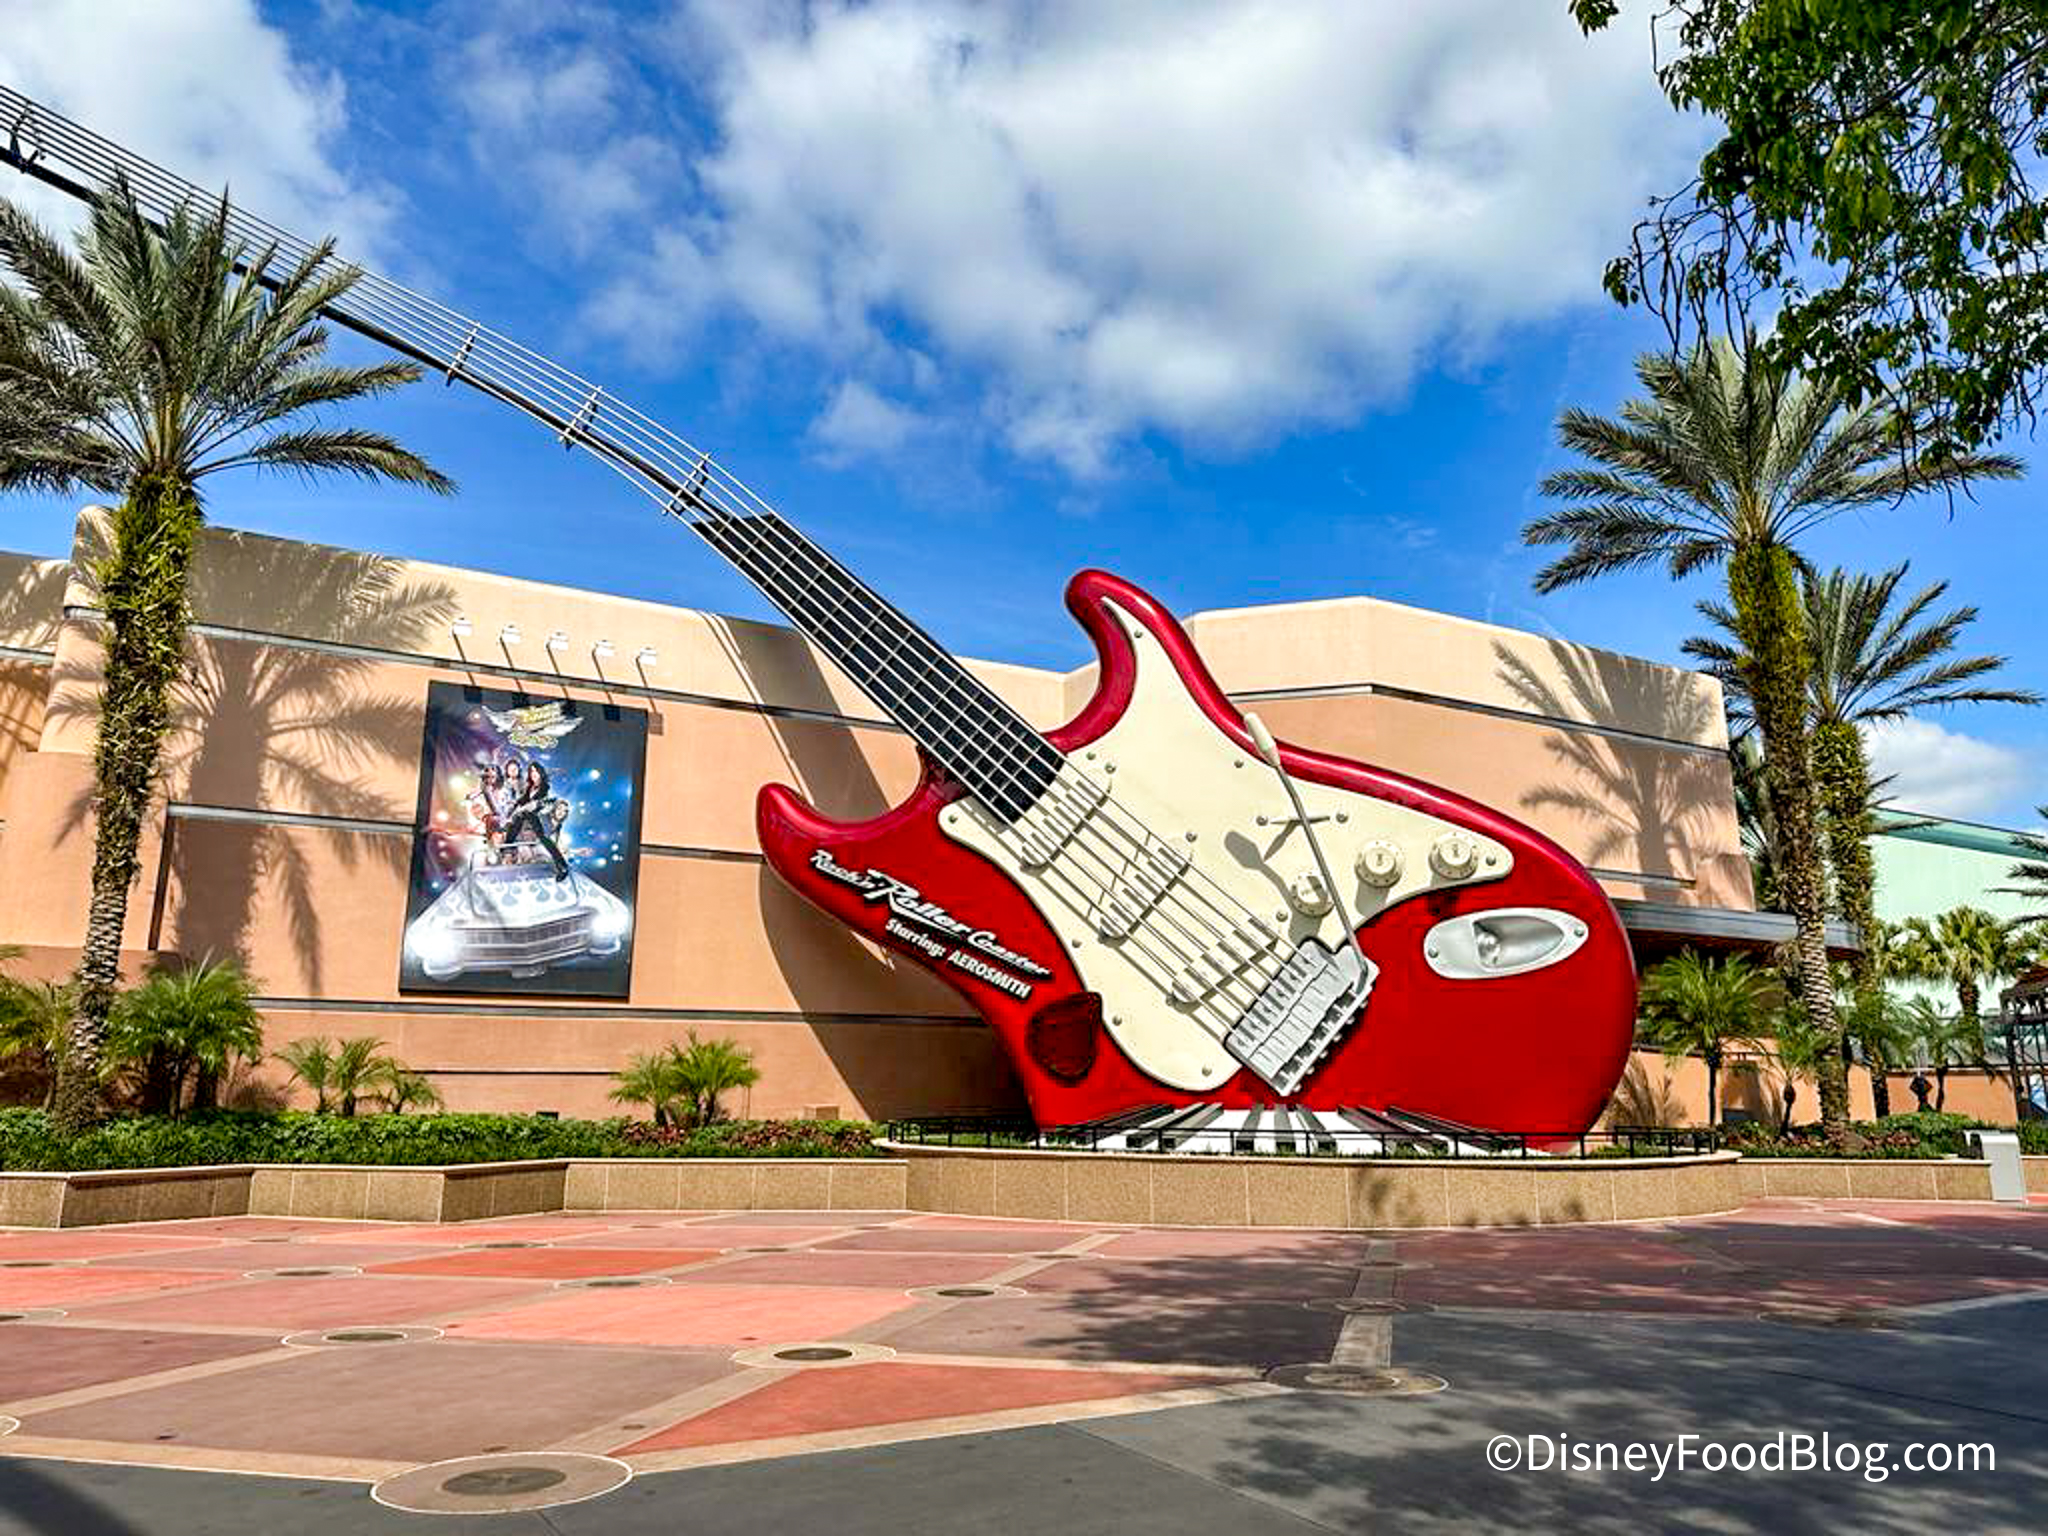 When is the Rock 'n' Roller coaster in Disney world expected to reopen?  Thrill ride closes for refurbishment